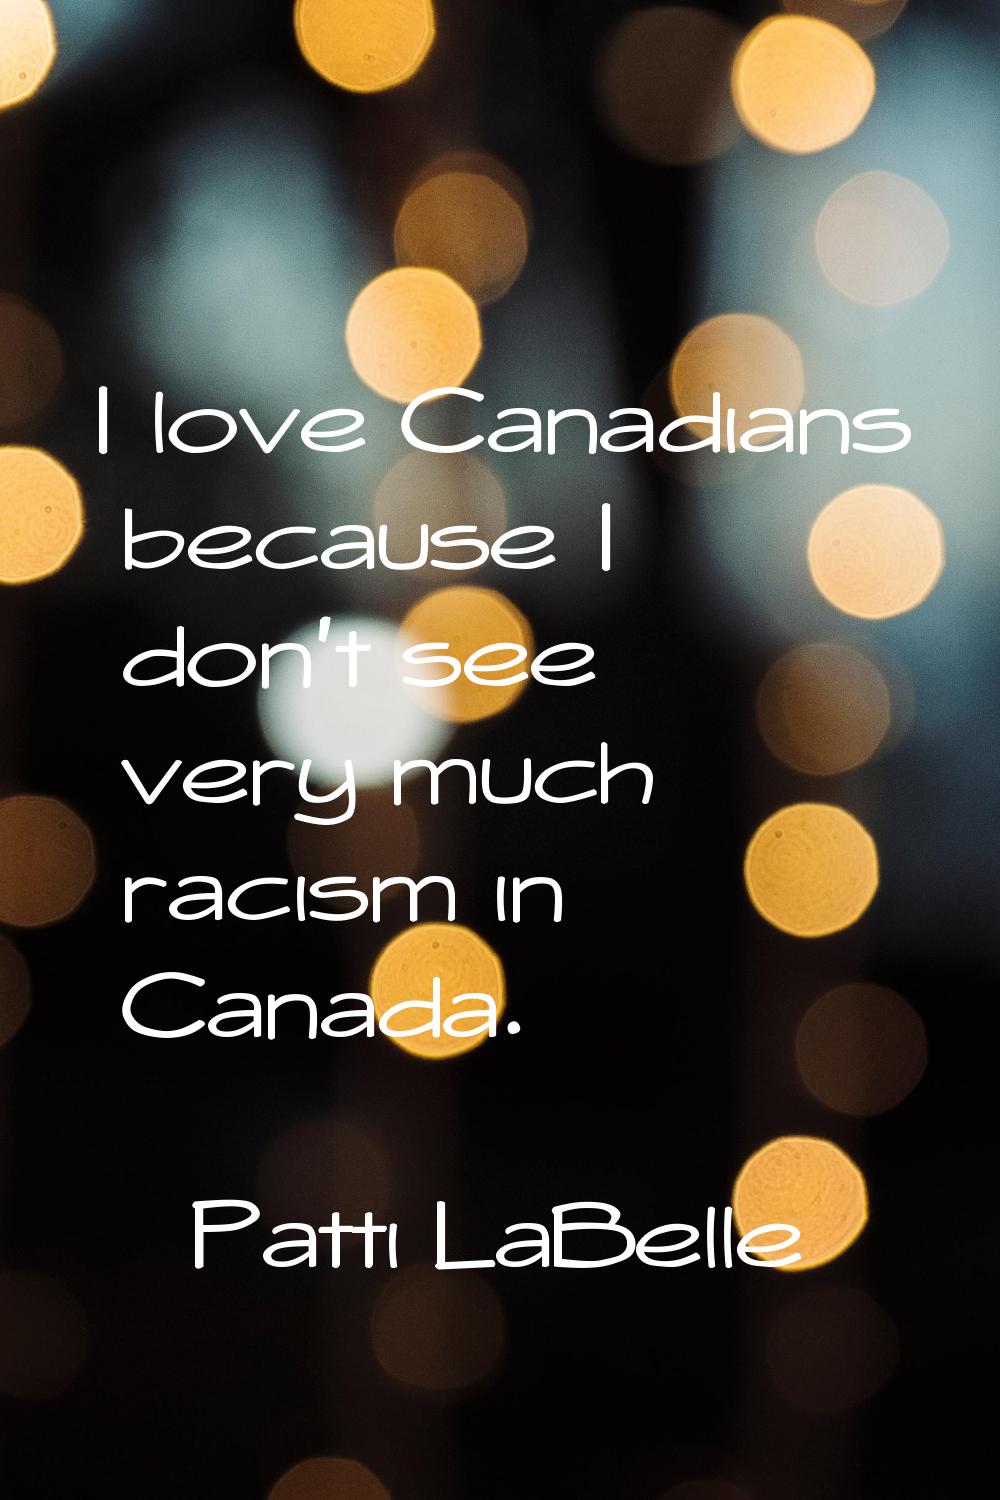 I love Canadians because I don't see very much racism in Canada.